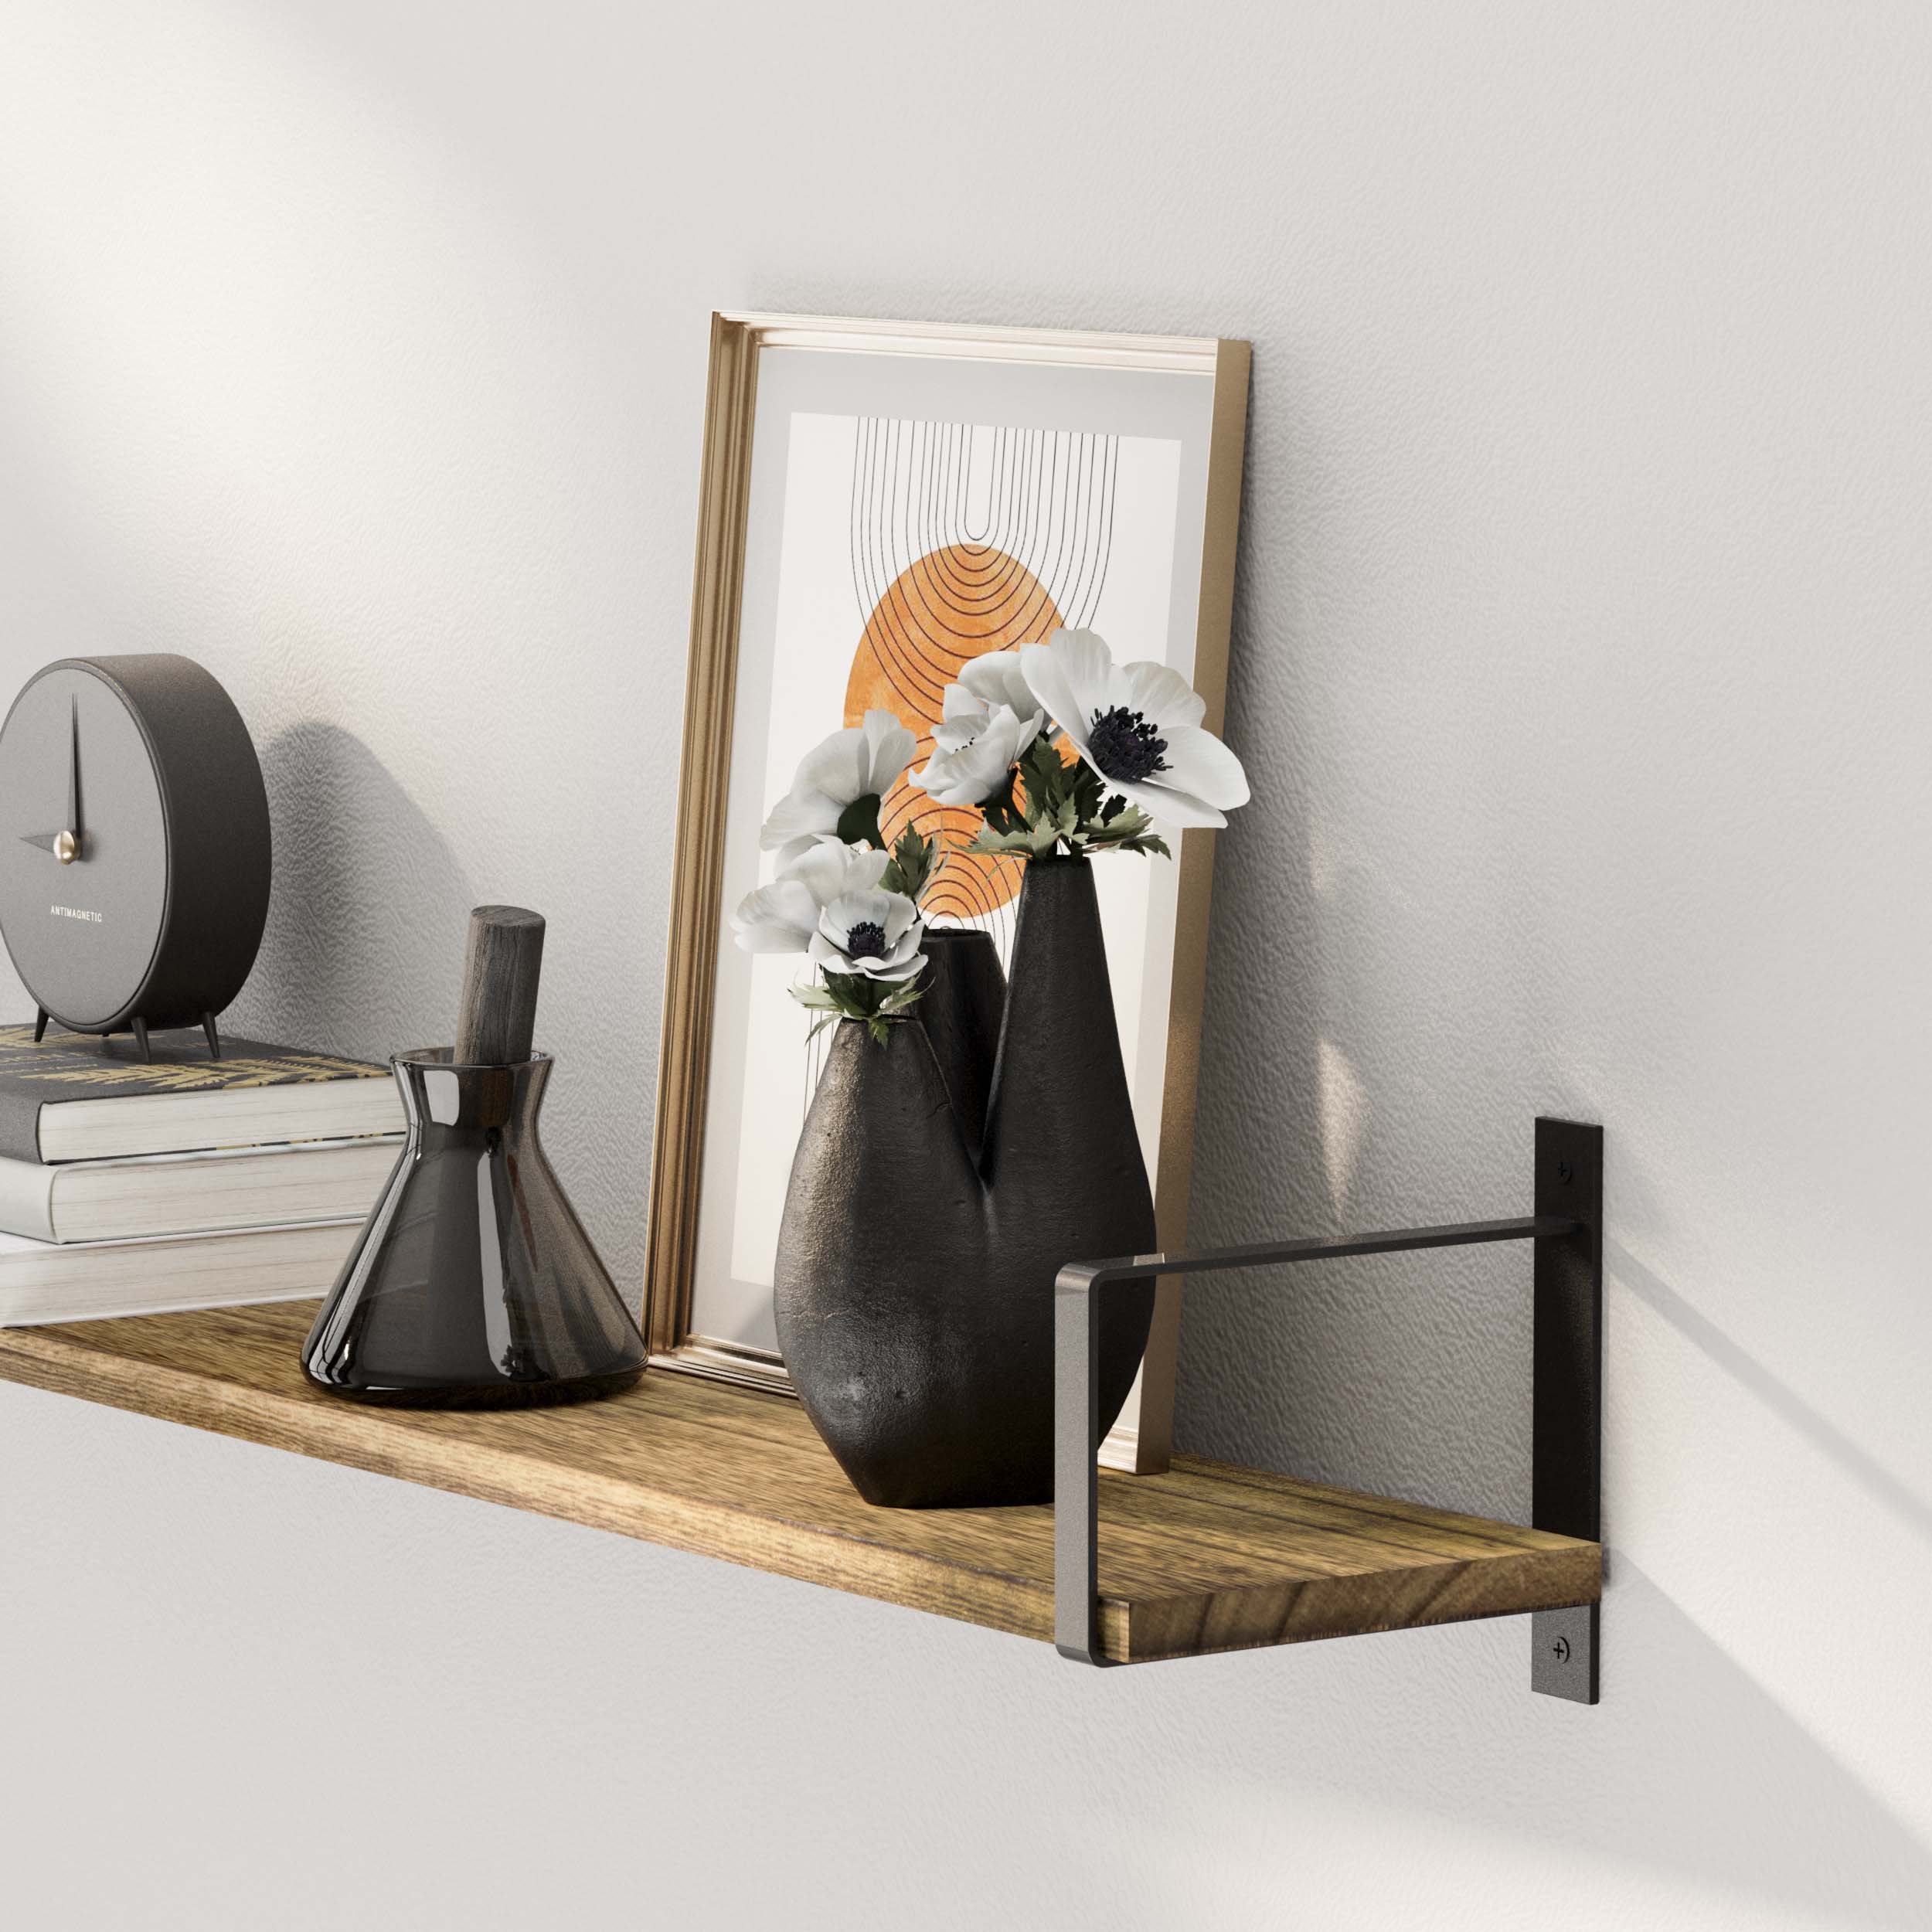 Wall shelf burnt with black vases and a framed abstract print, under soft lighting, creating a serene ambiance.